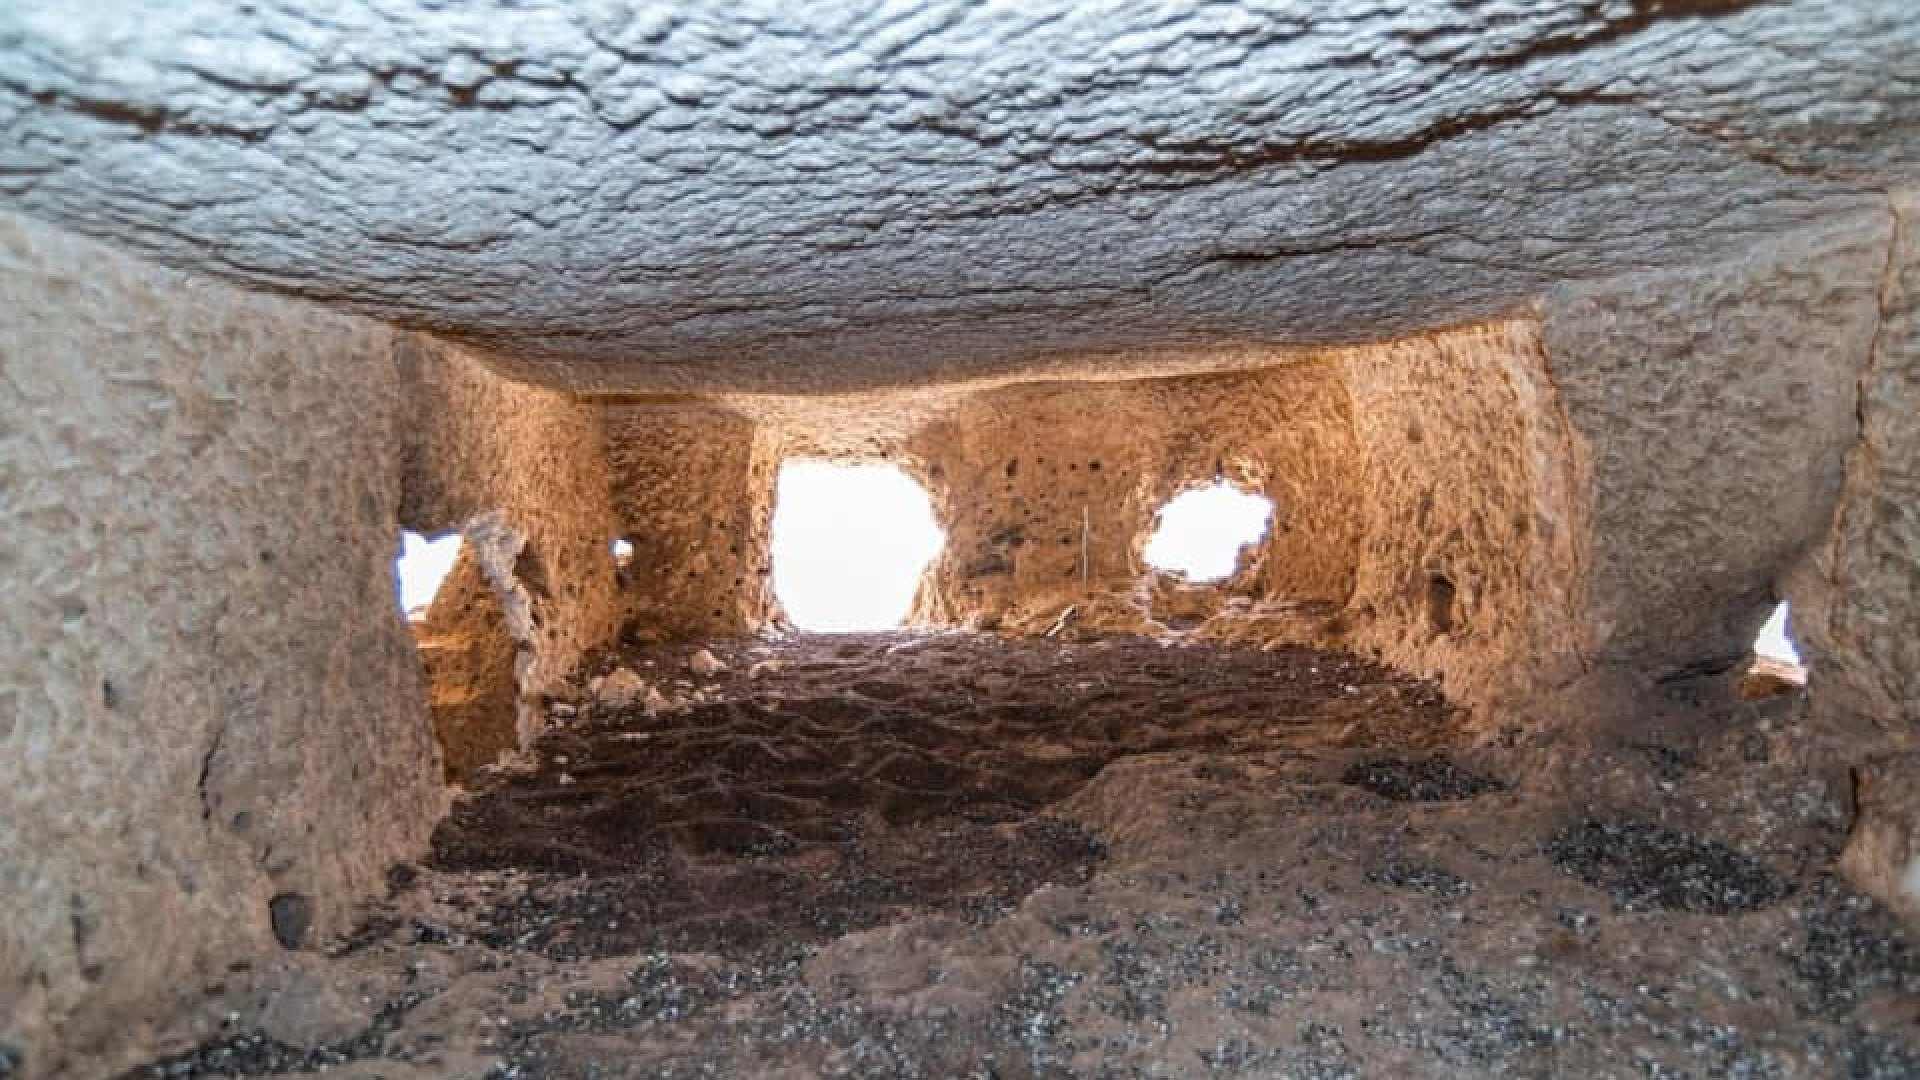 Mysterious chambers created in the rock were found on a cliff in Abydos, Egypt 2